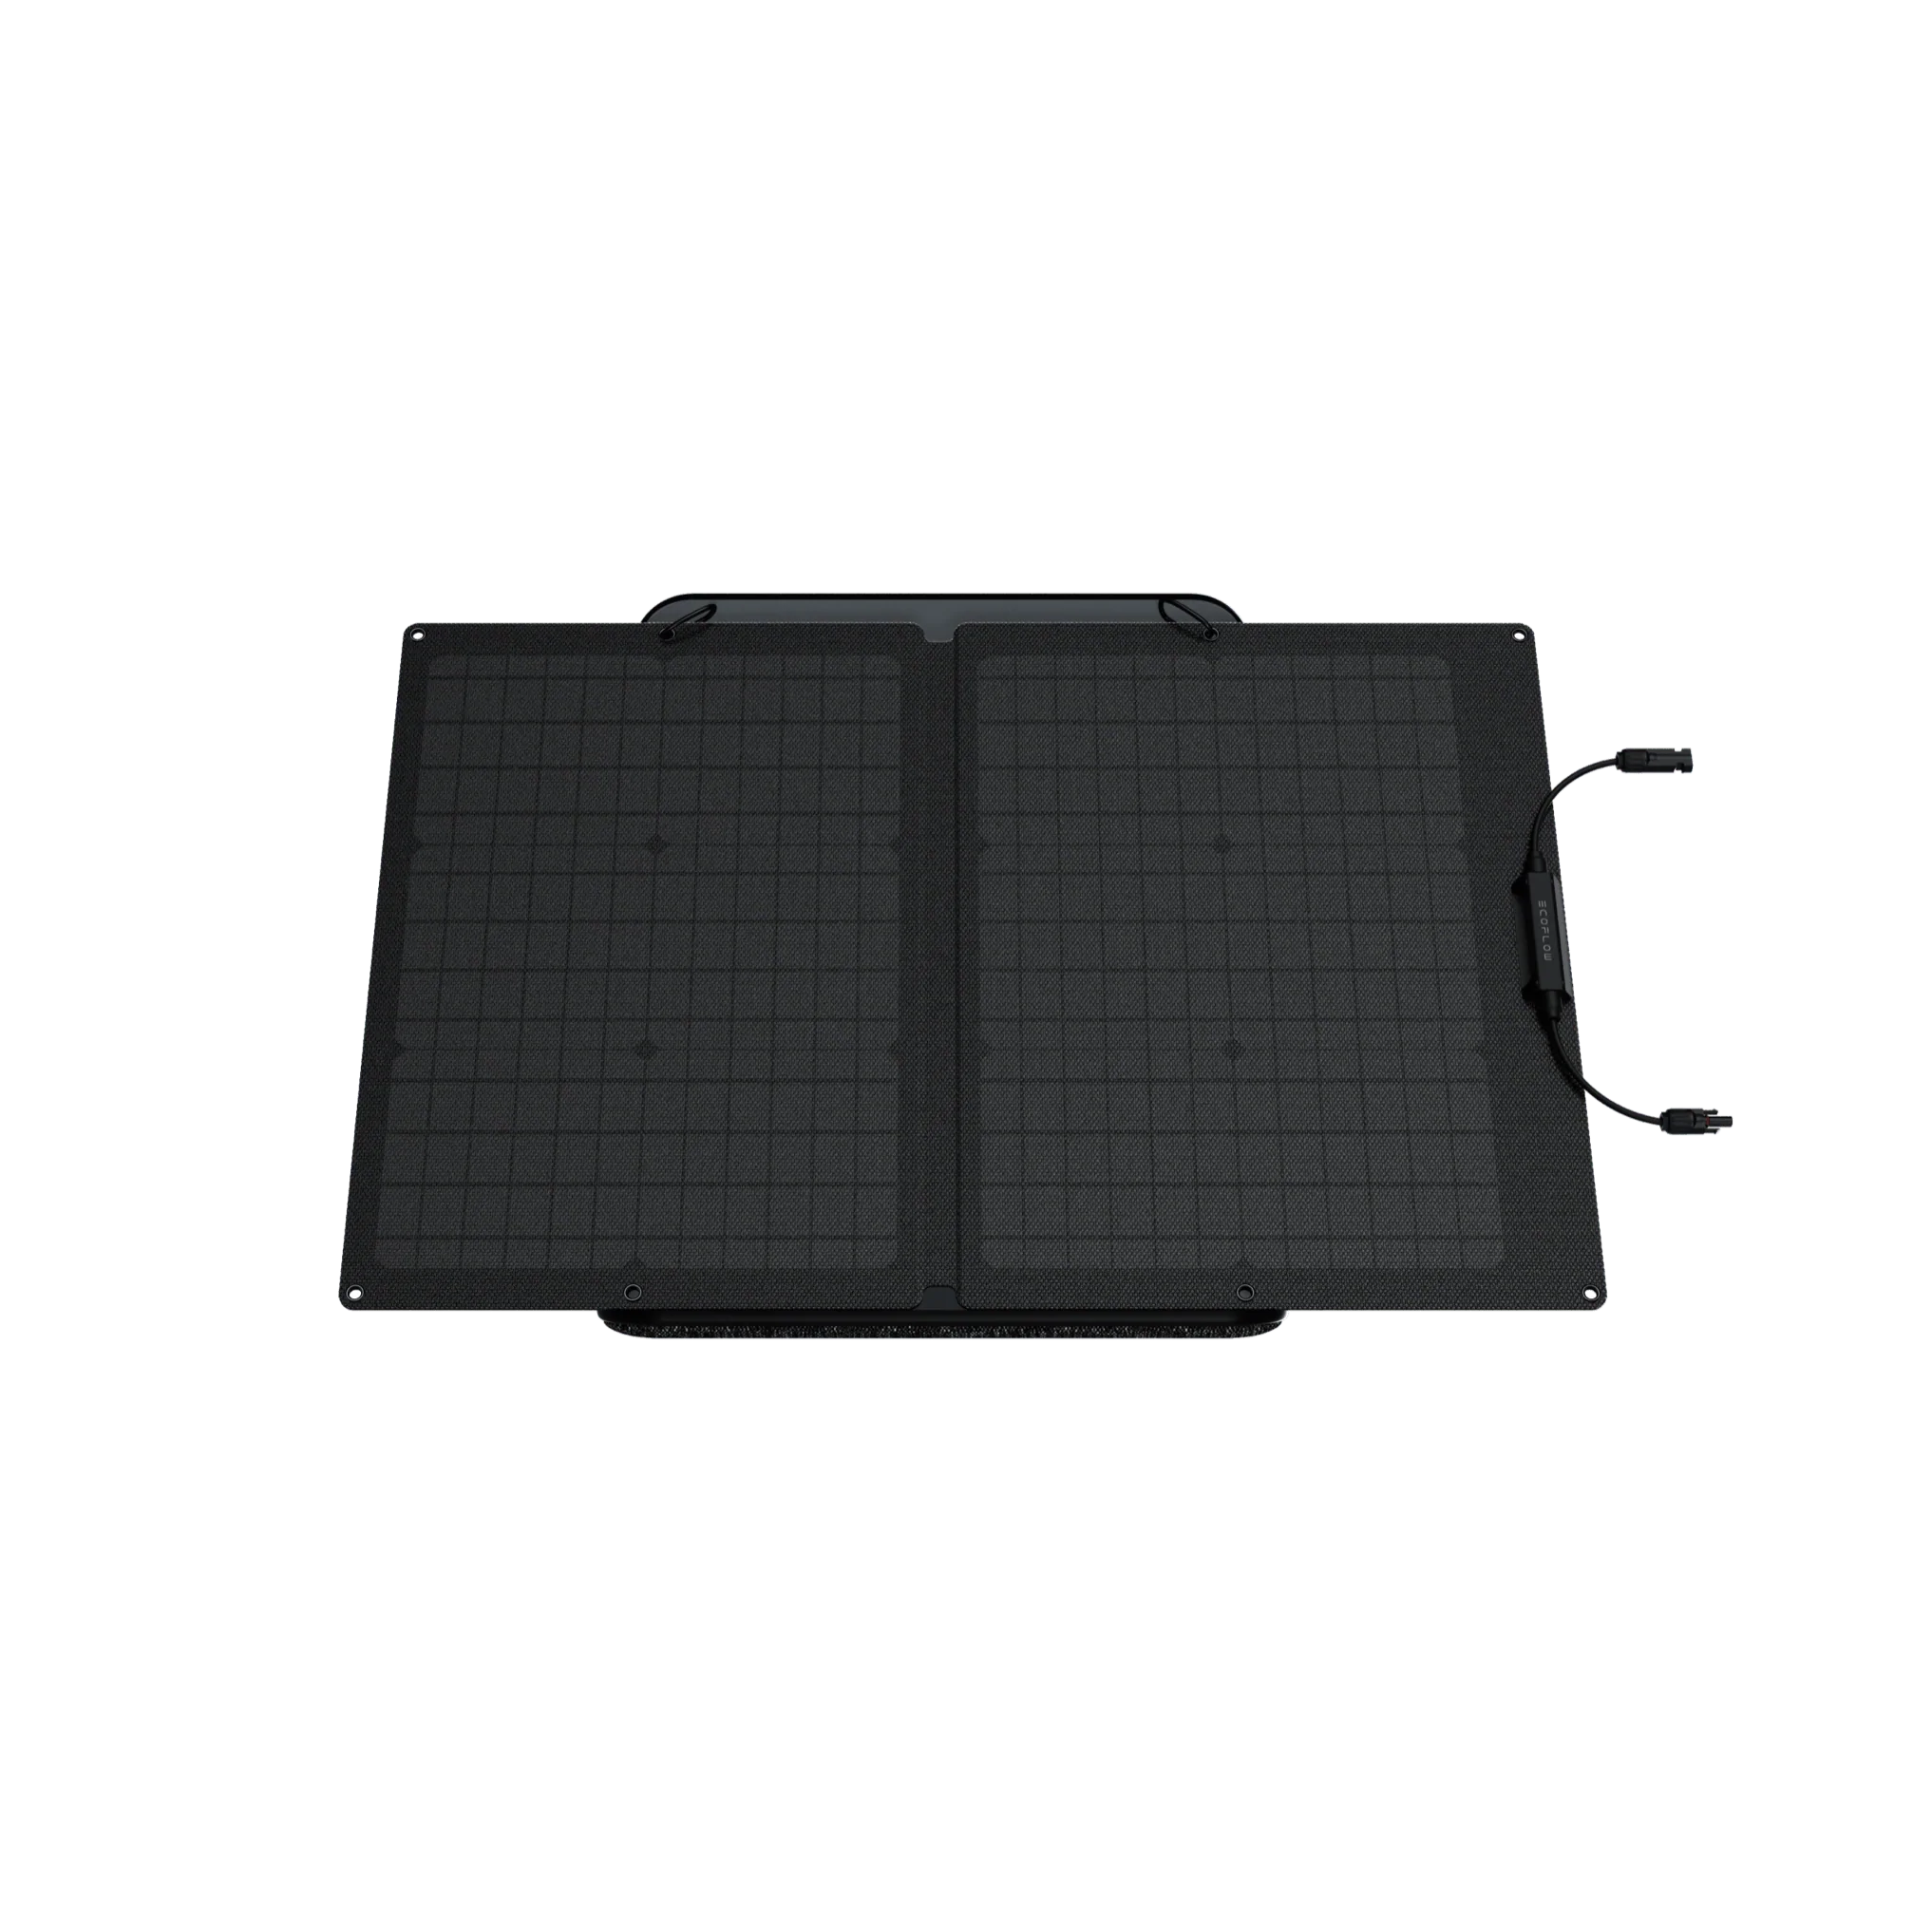 A portable black solar panel from EcoFlow, shipping in 1-2 weeks.